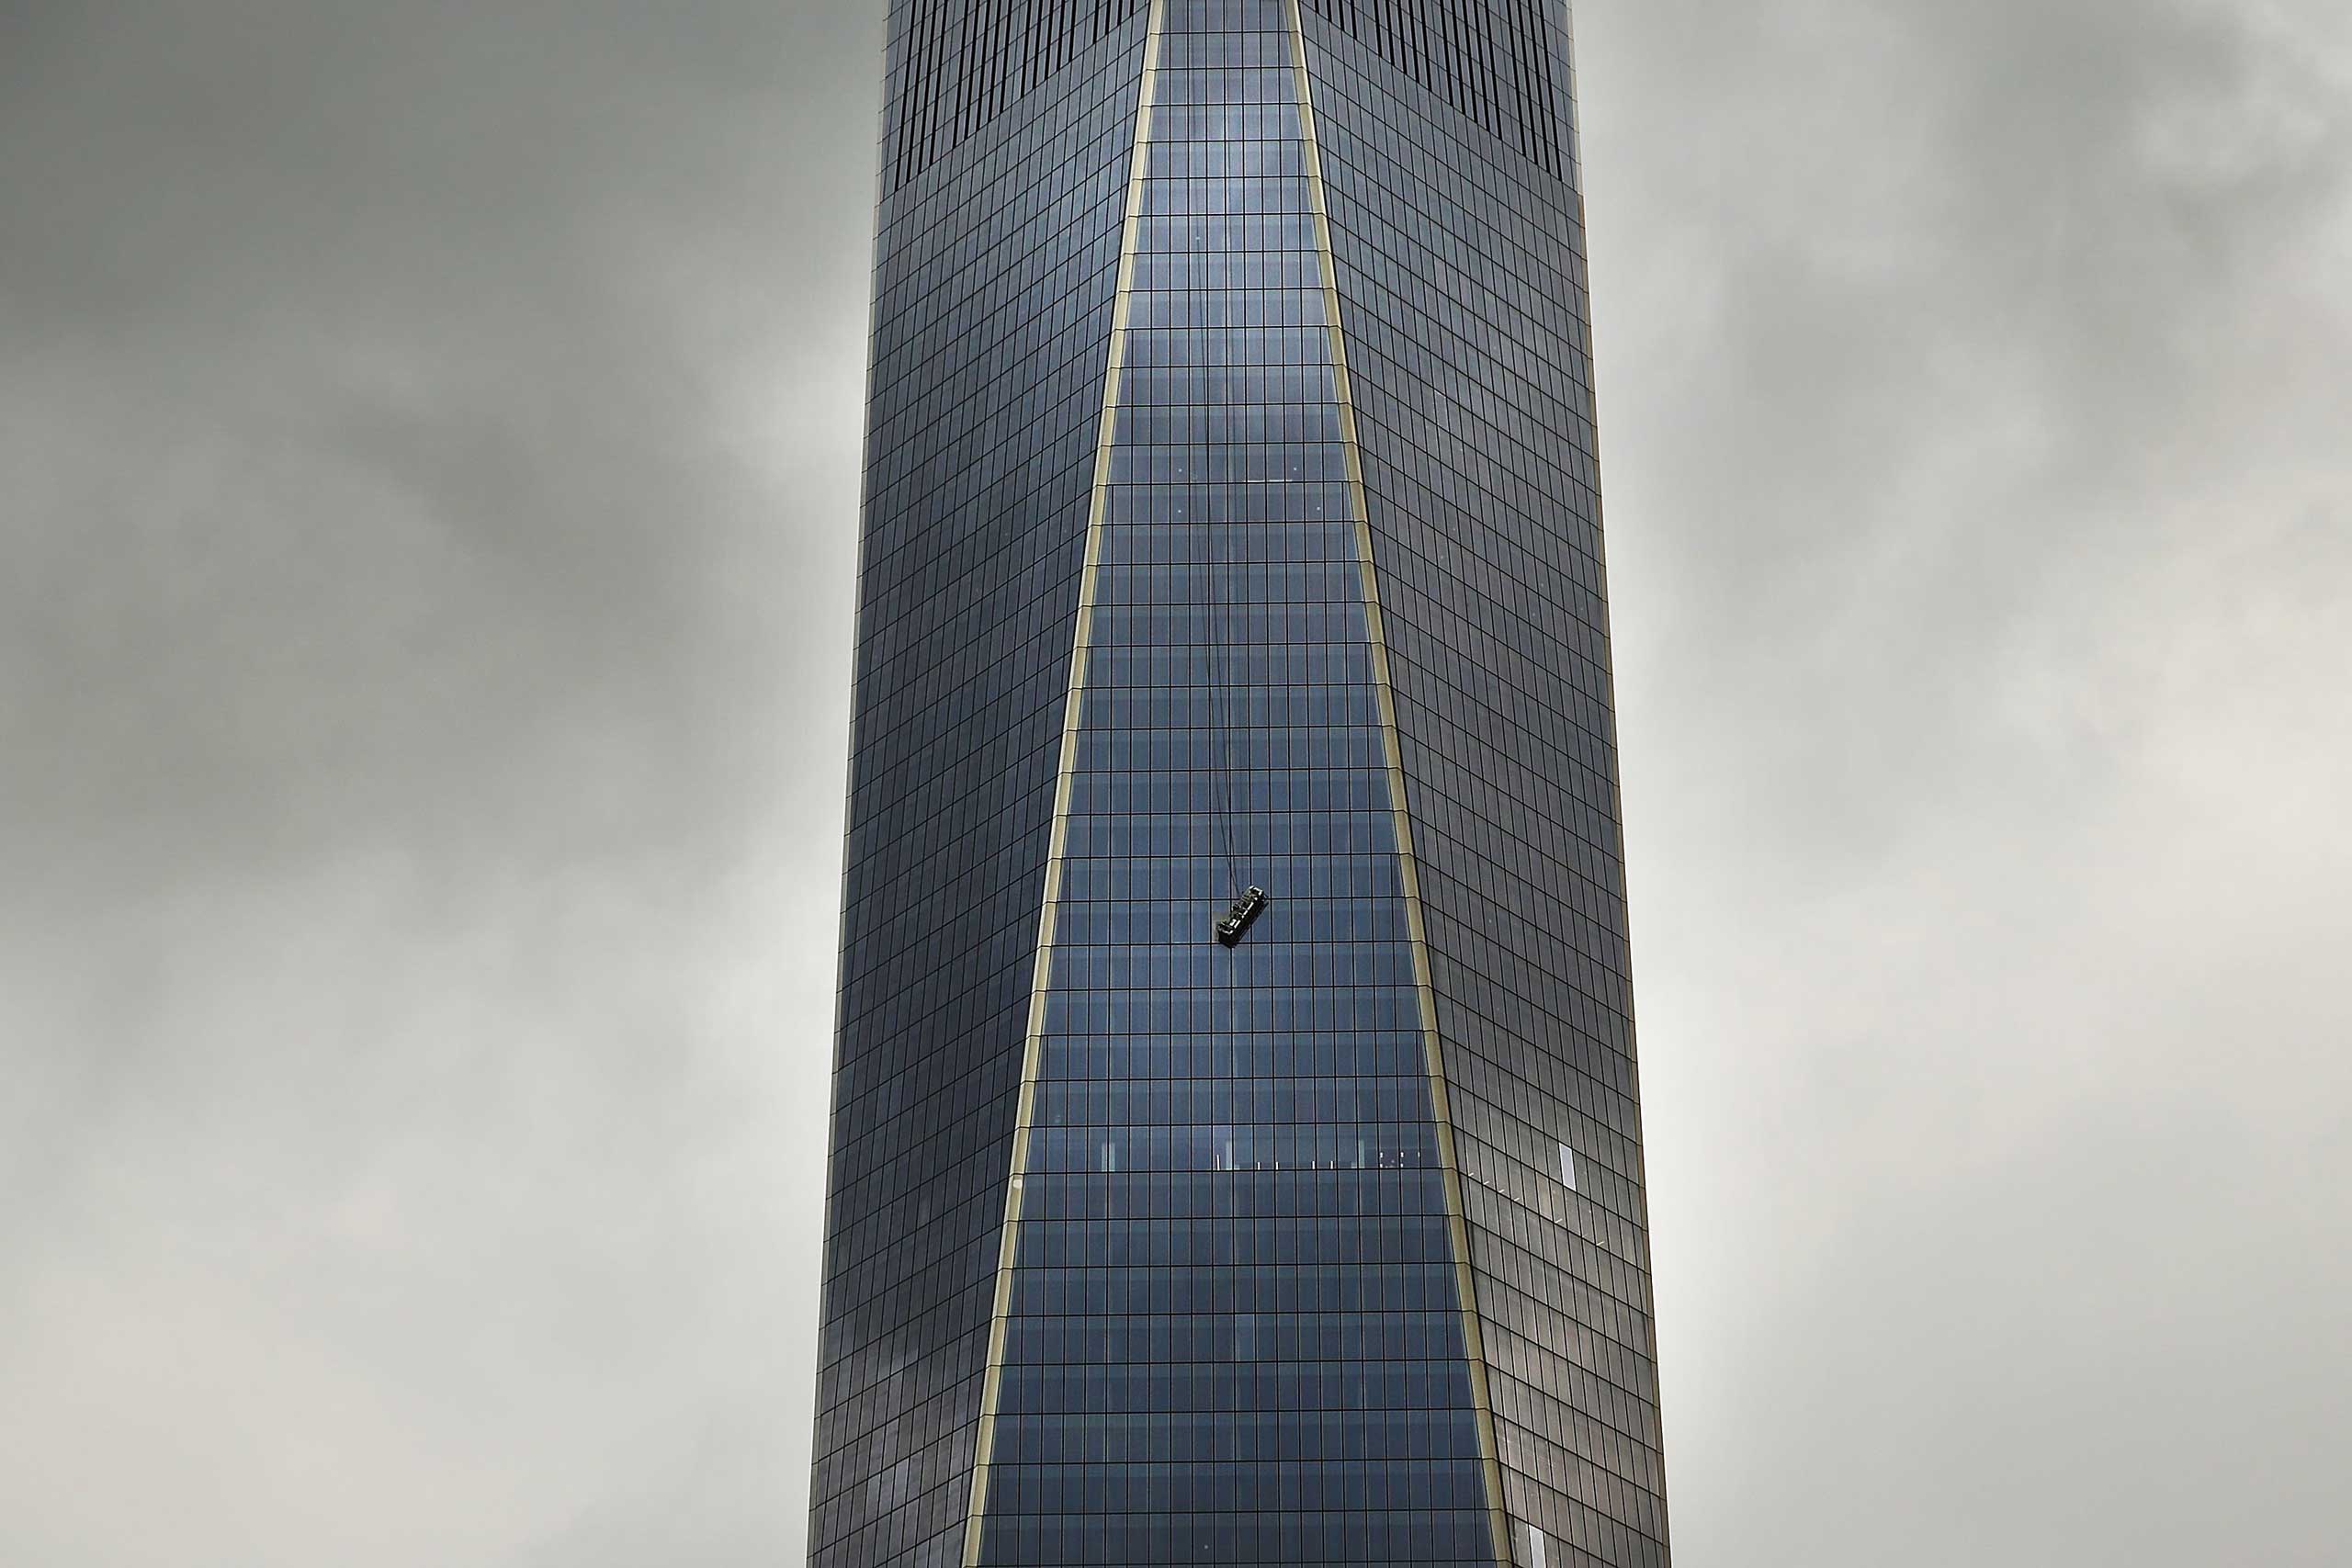 A scaffold carrying two workers hangs 69 floors up at One World Trade Center in New York City, Nov. 12, 2014.